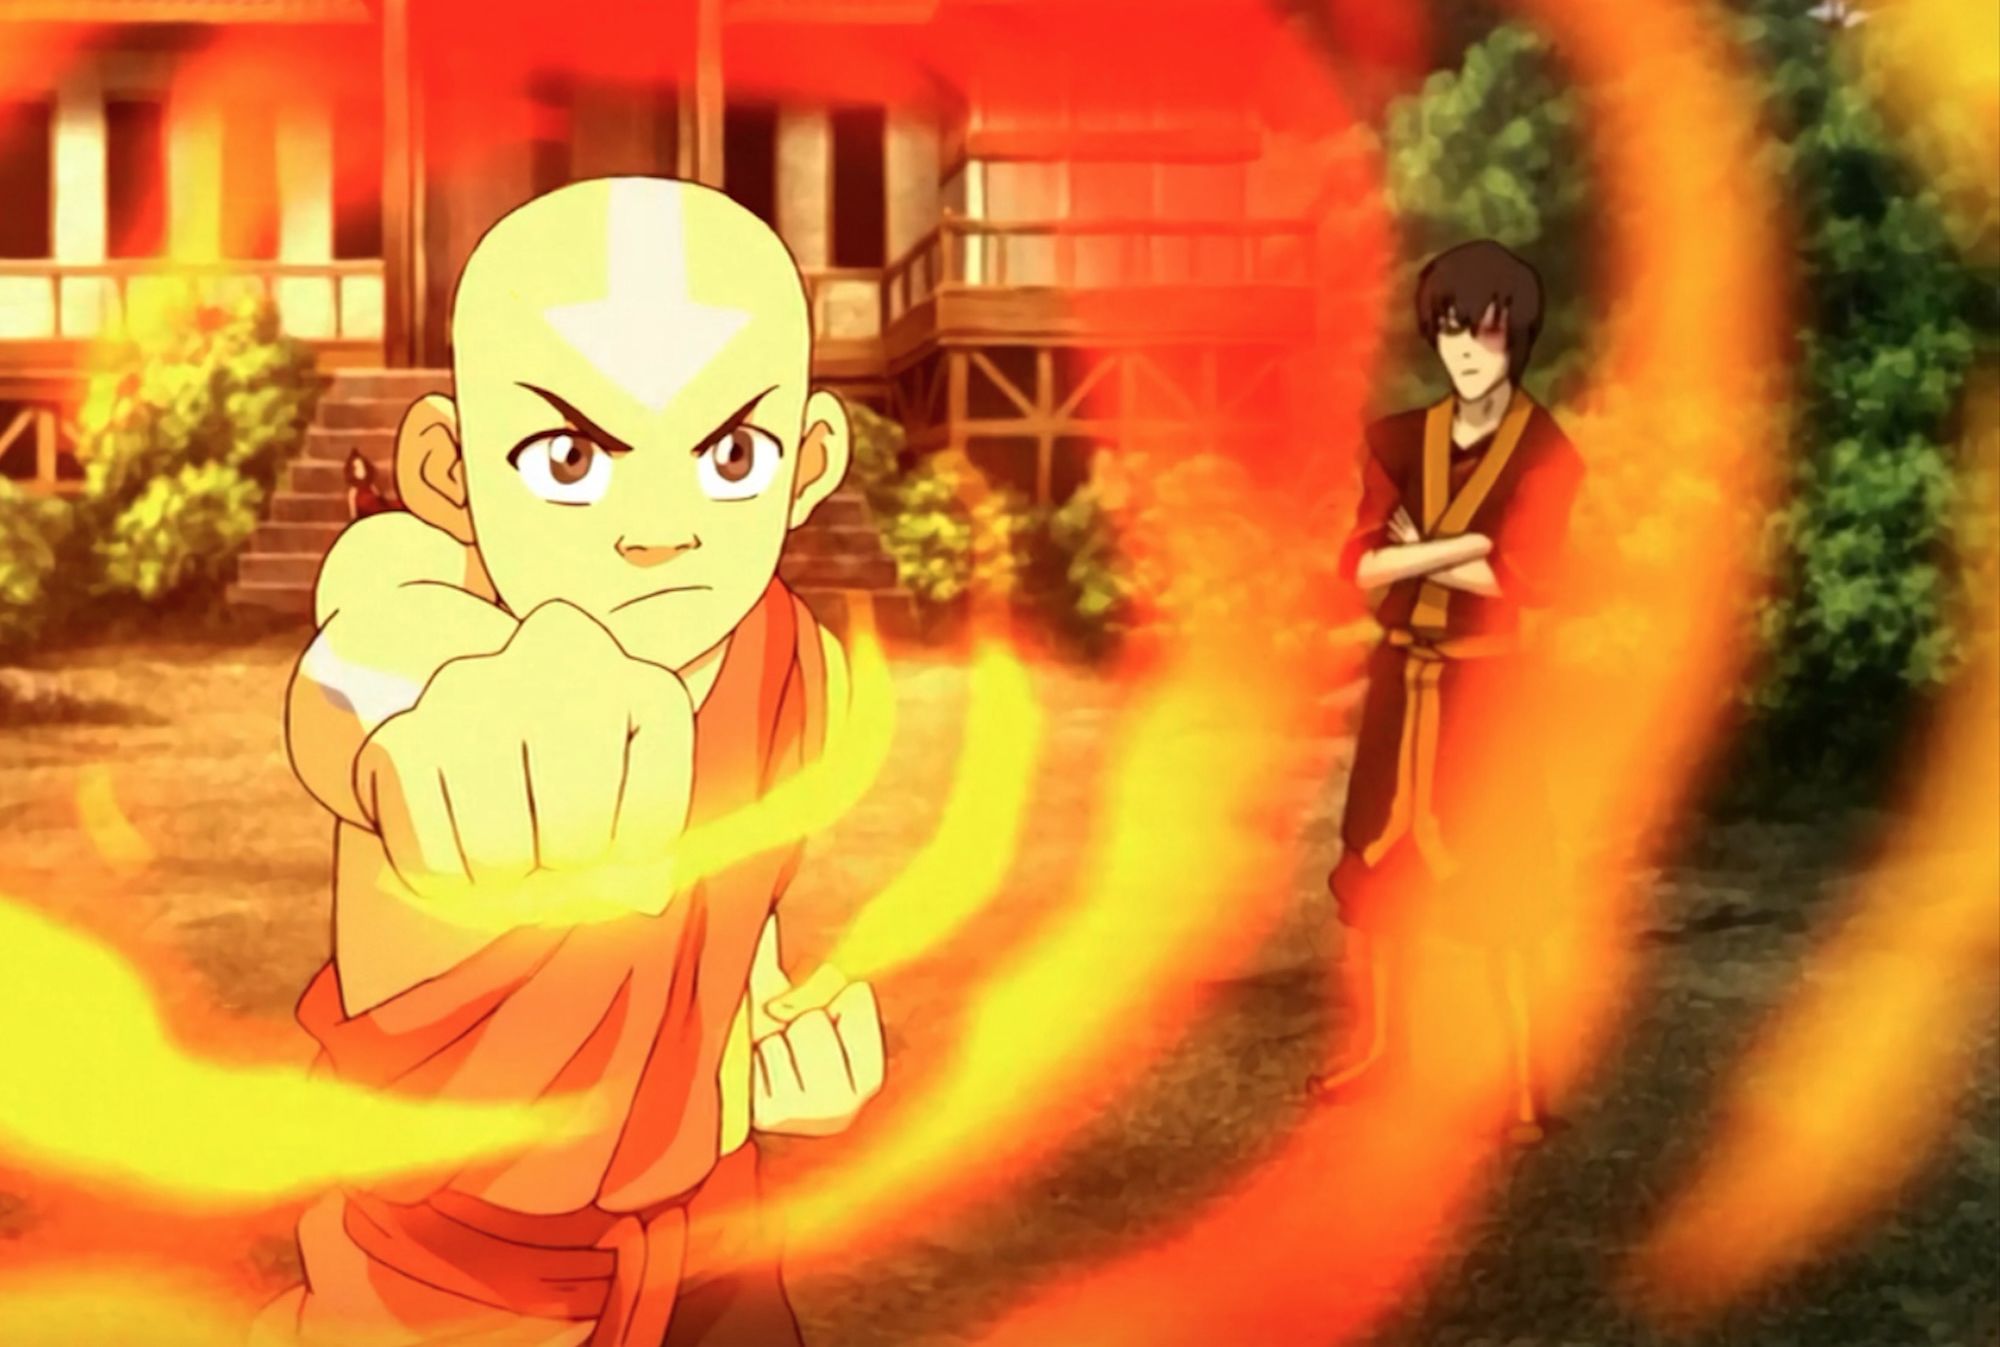 they should make a new avatar series when aang was older